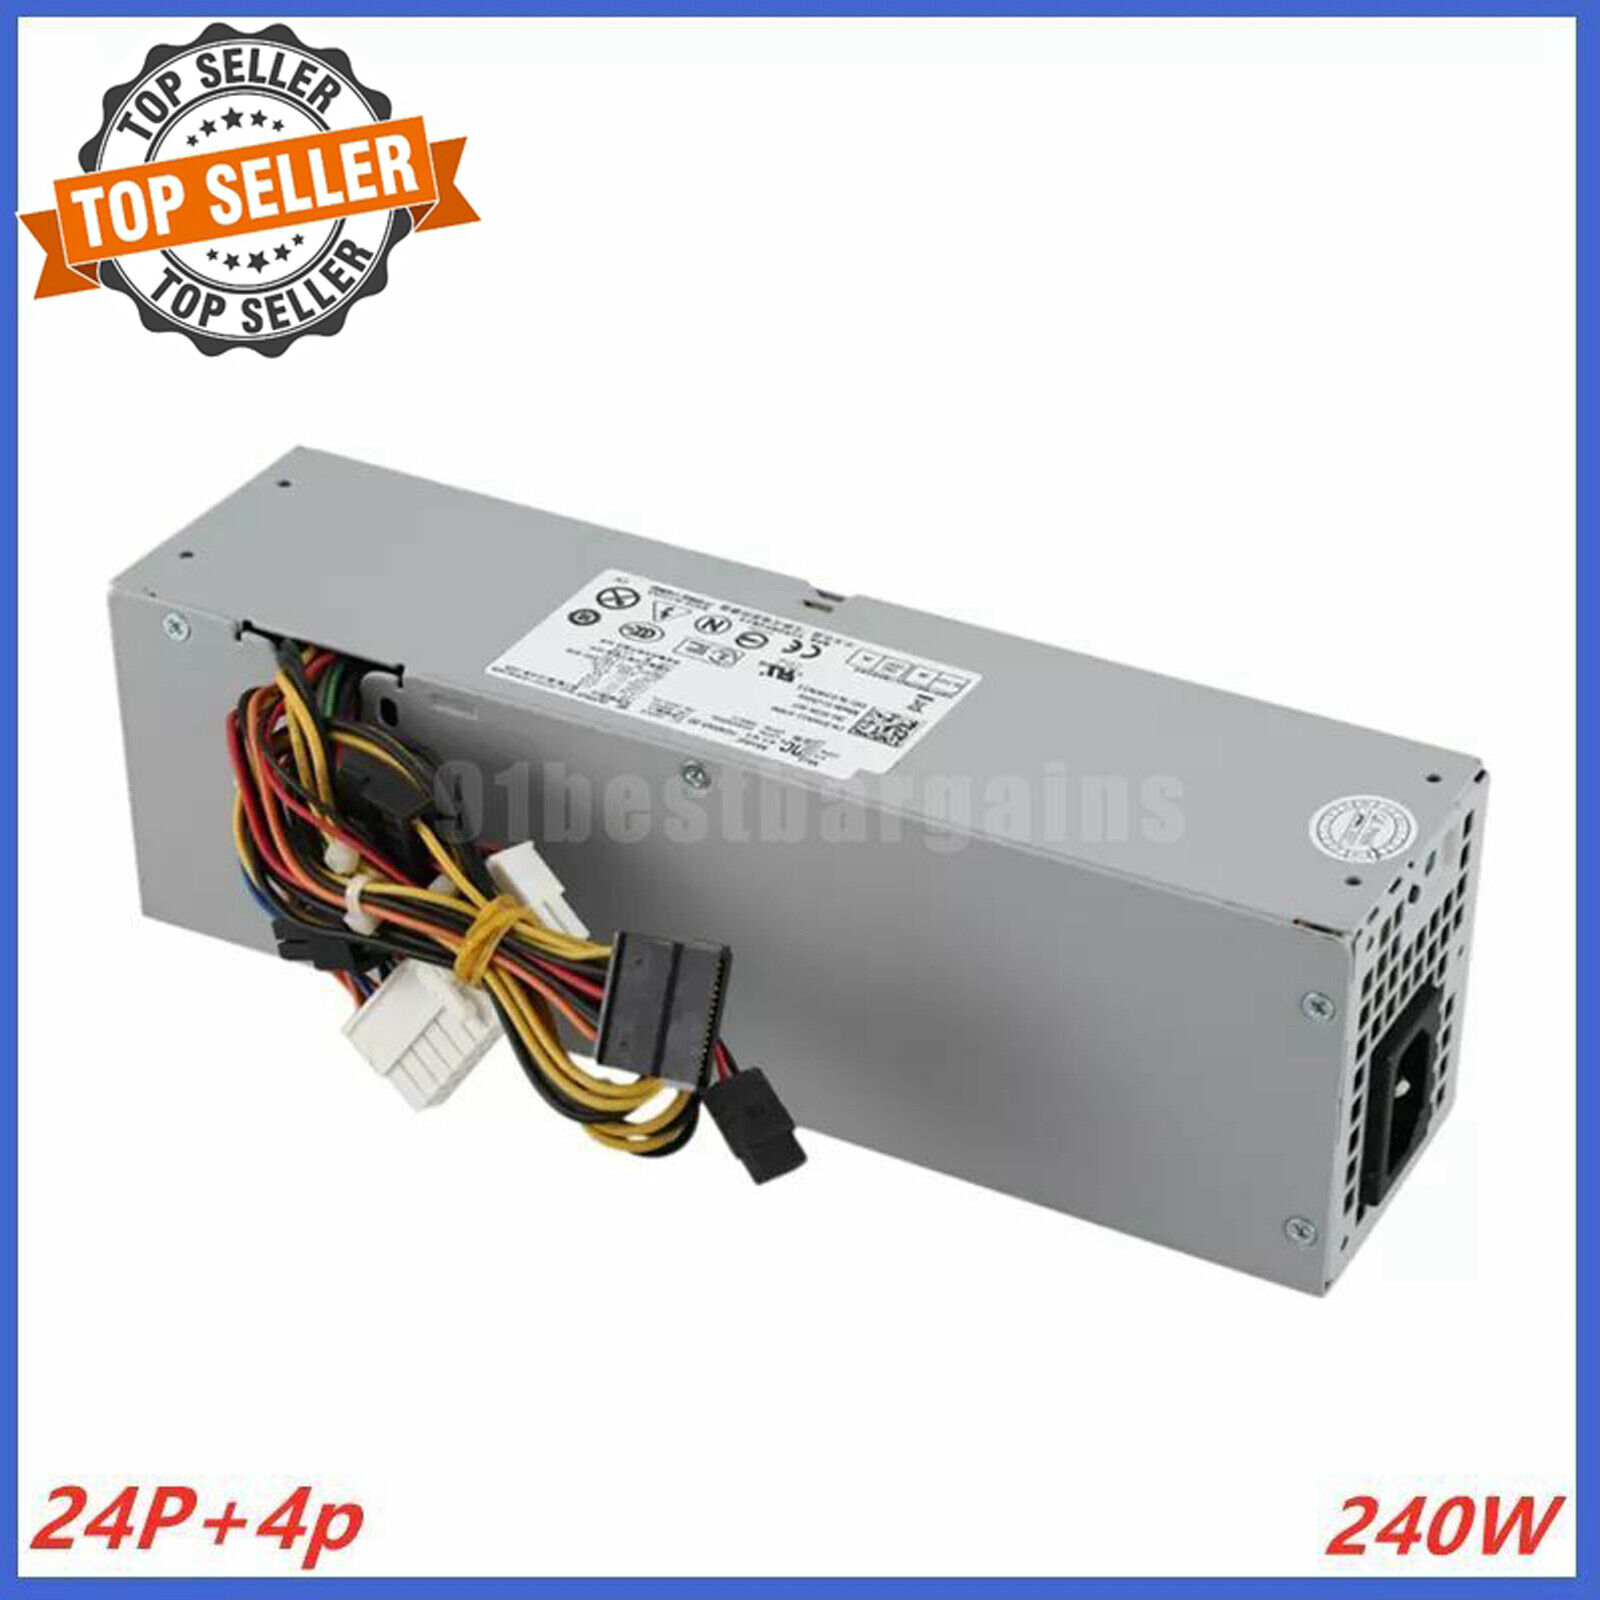 SFF PC 240W Power Supply for Dell OptiPlex 390 990 790 960 7010 3010 H240AS-00